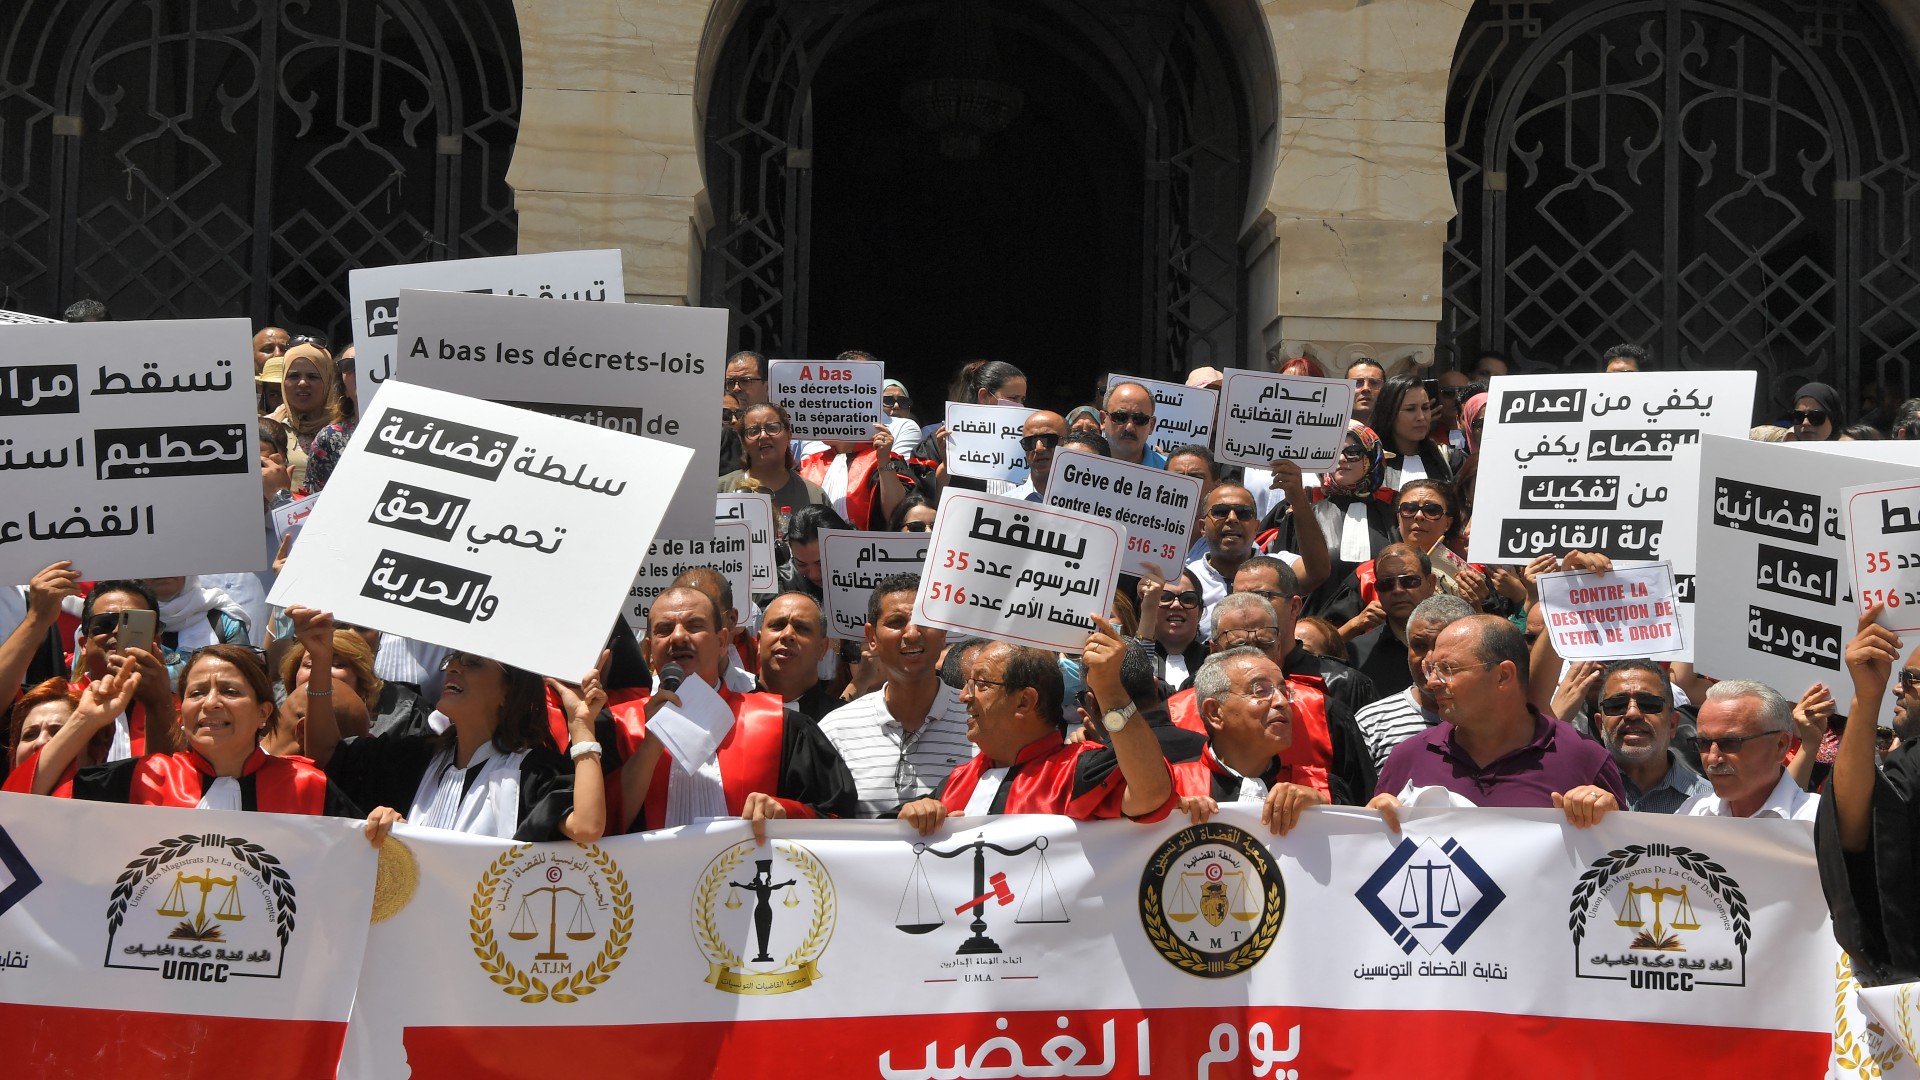 Judges gather for a protest against Tunisia's President Kais Saied outside the Tunis Palace of Justice in Tunisia's capital on June 23, 2022.